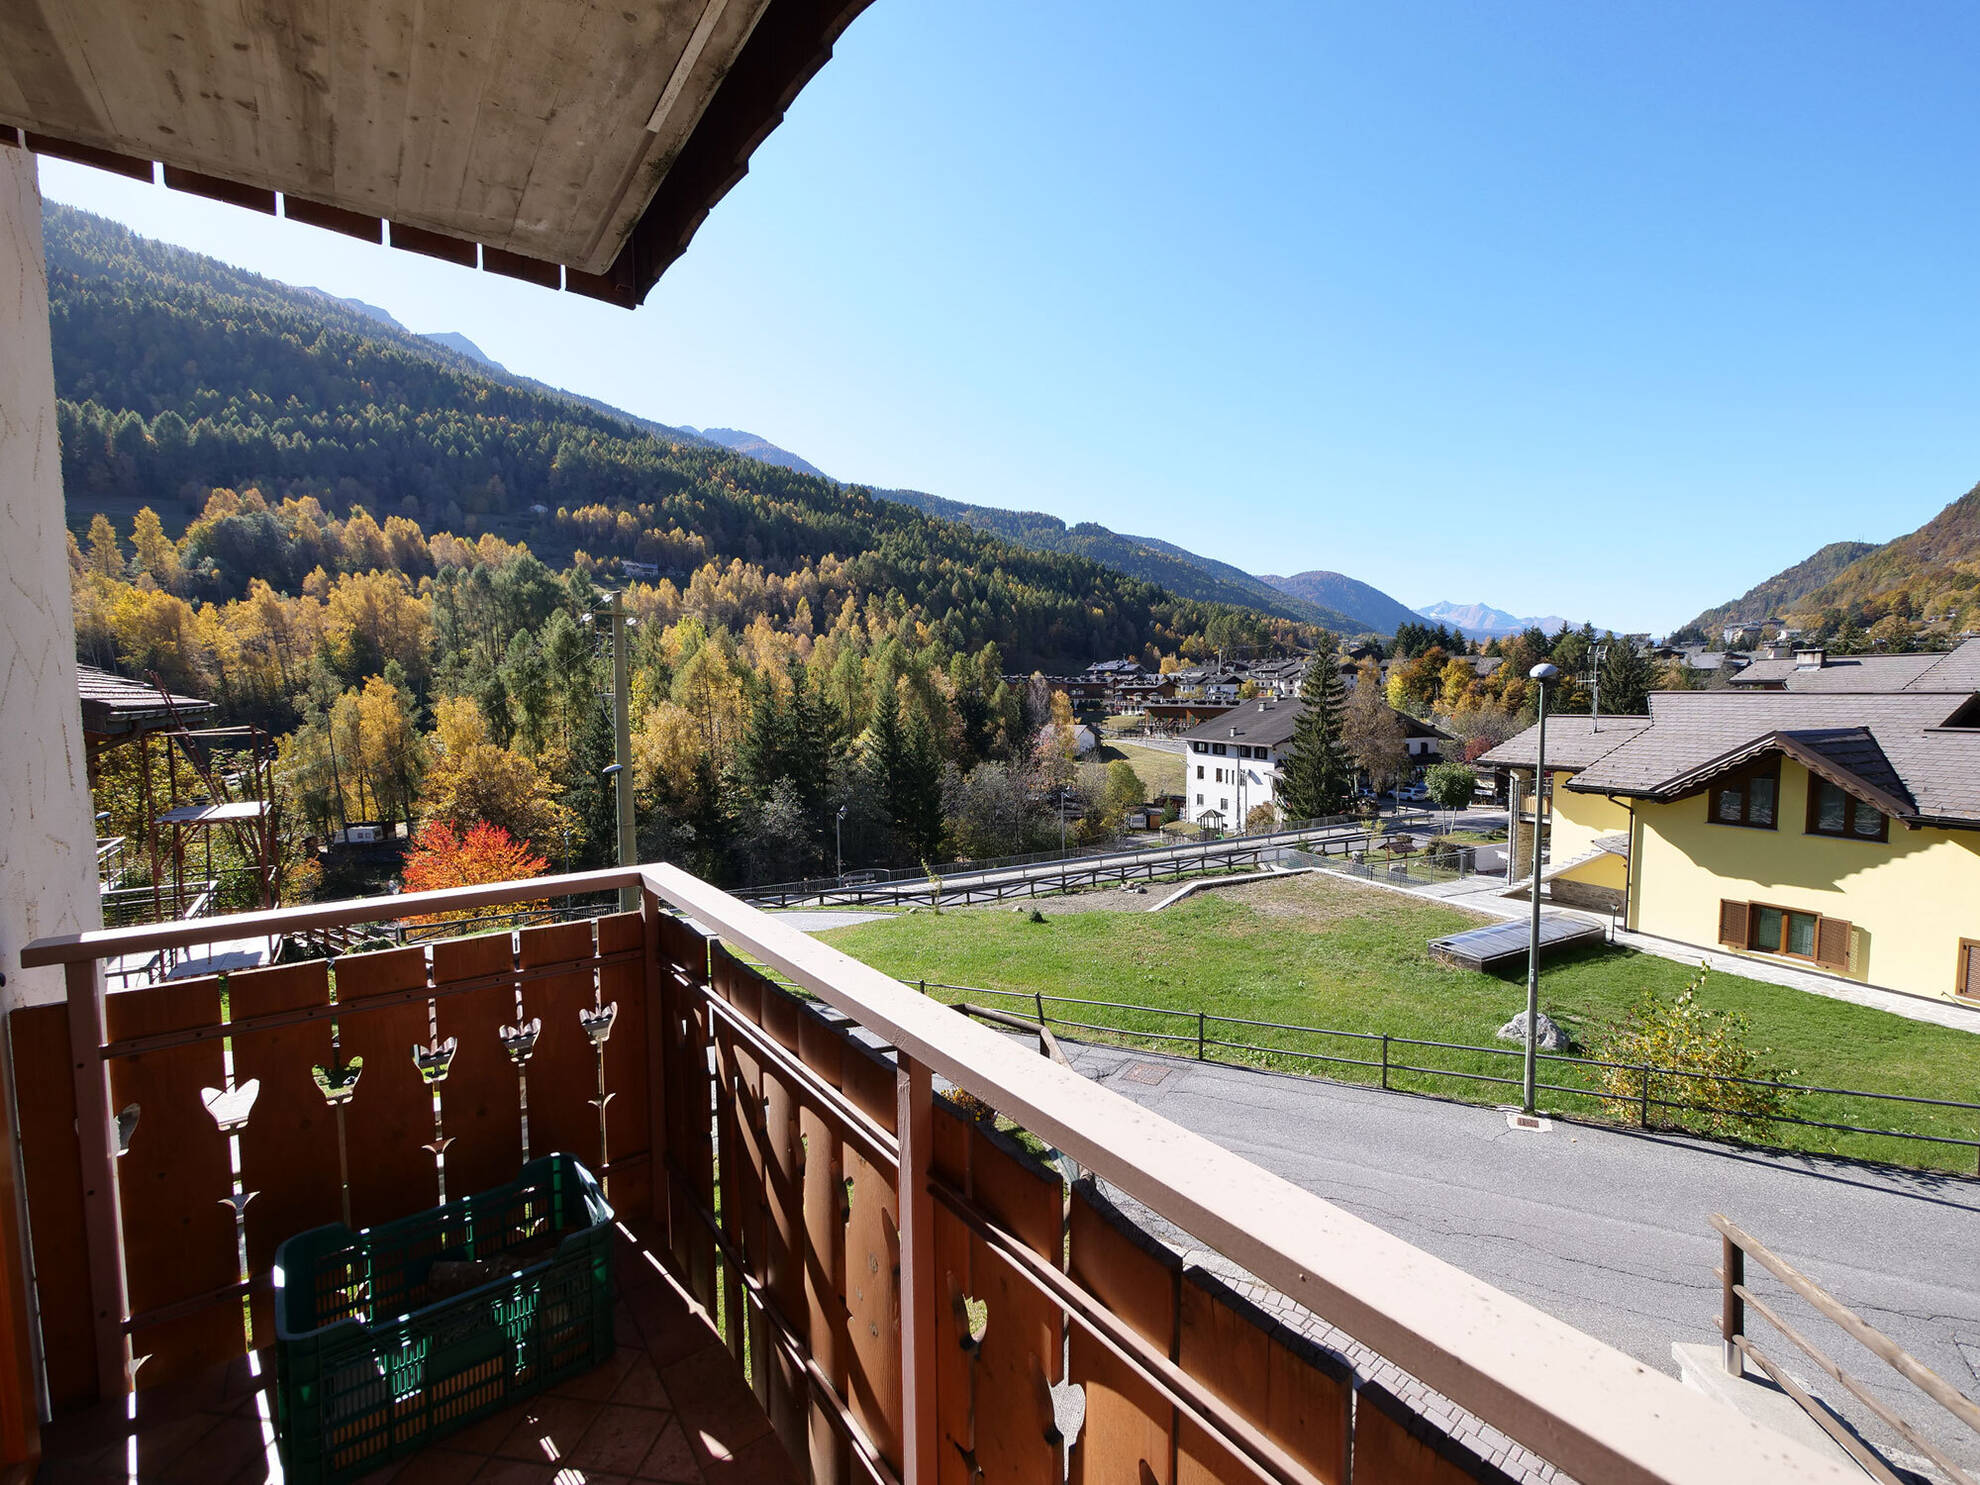 Aprica Chalet Affitto Annuale 